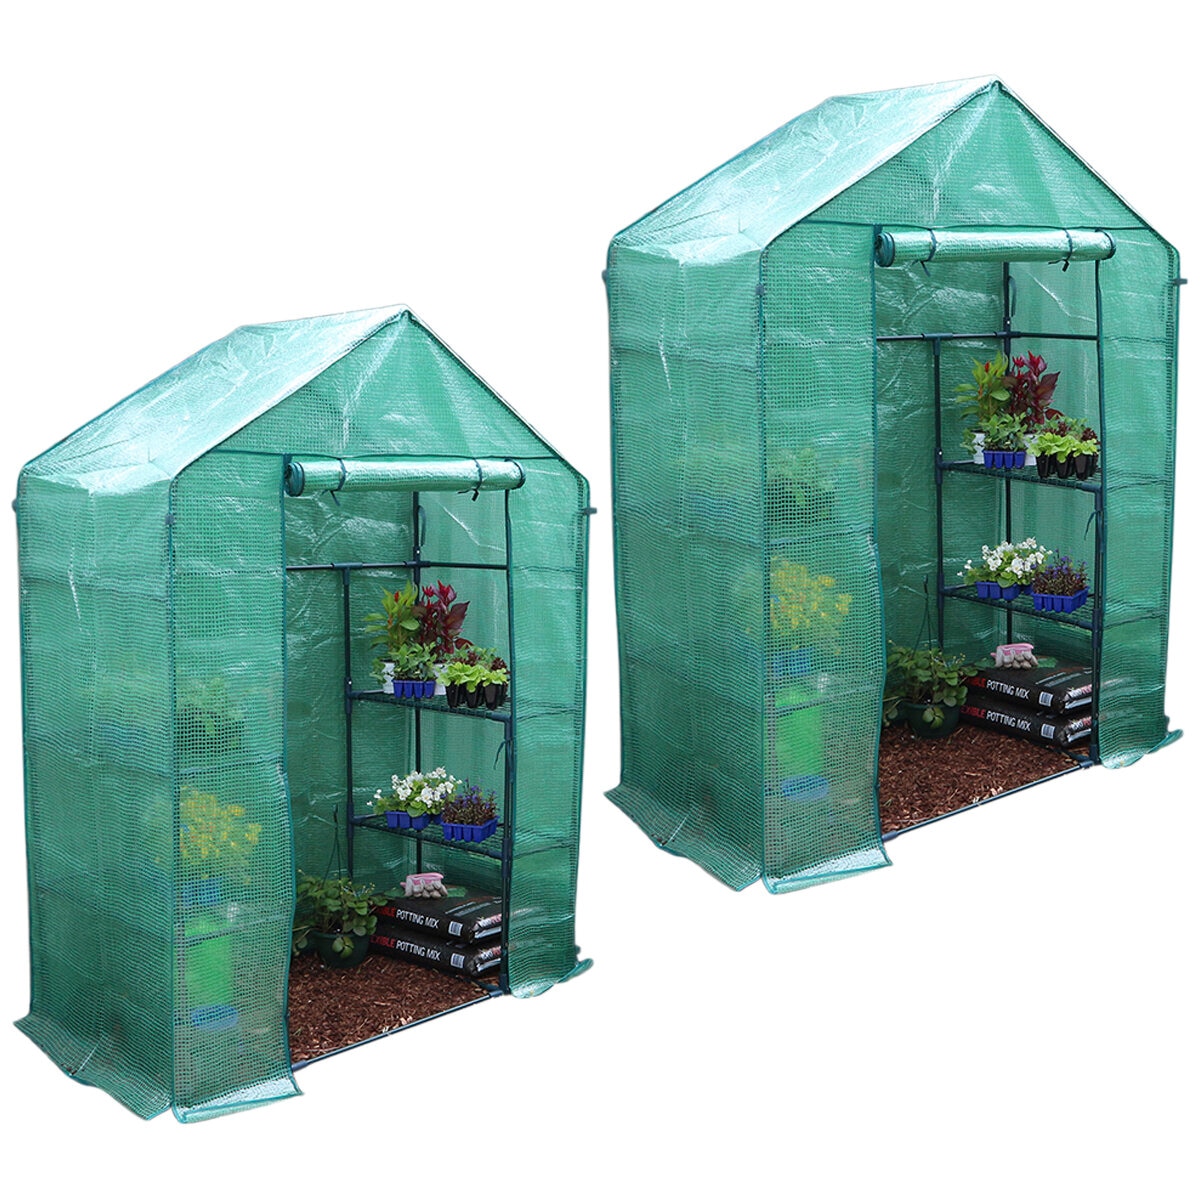 Greenlife Walk-in Greenhouse 2 Tier Twin Pack with PE Cover 195 x 143 x 73cm